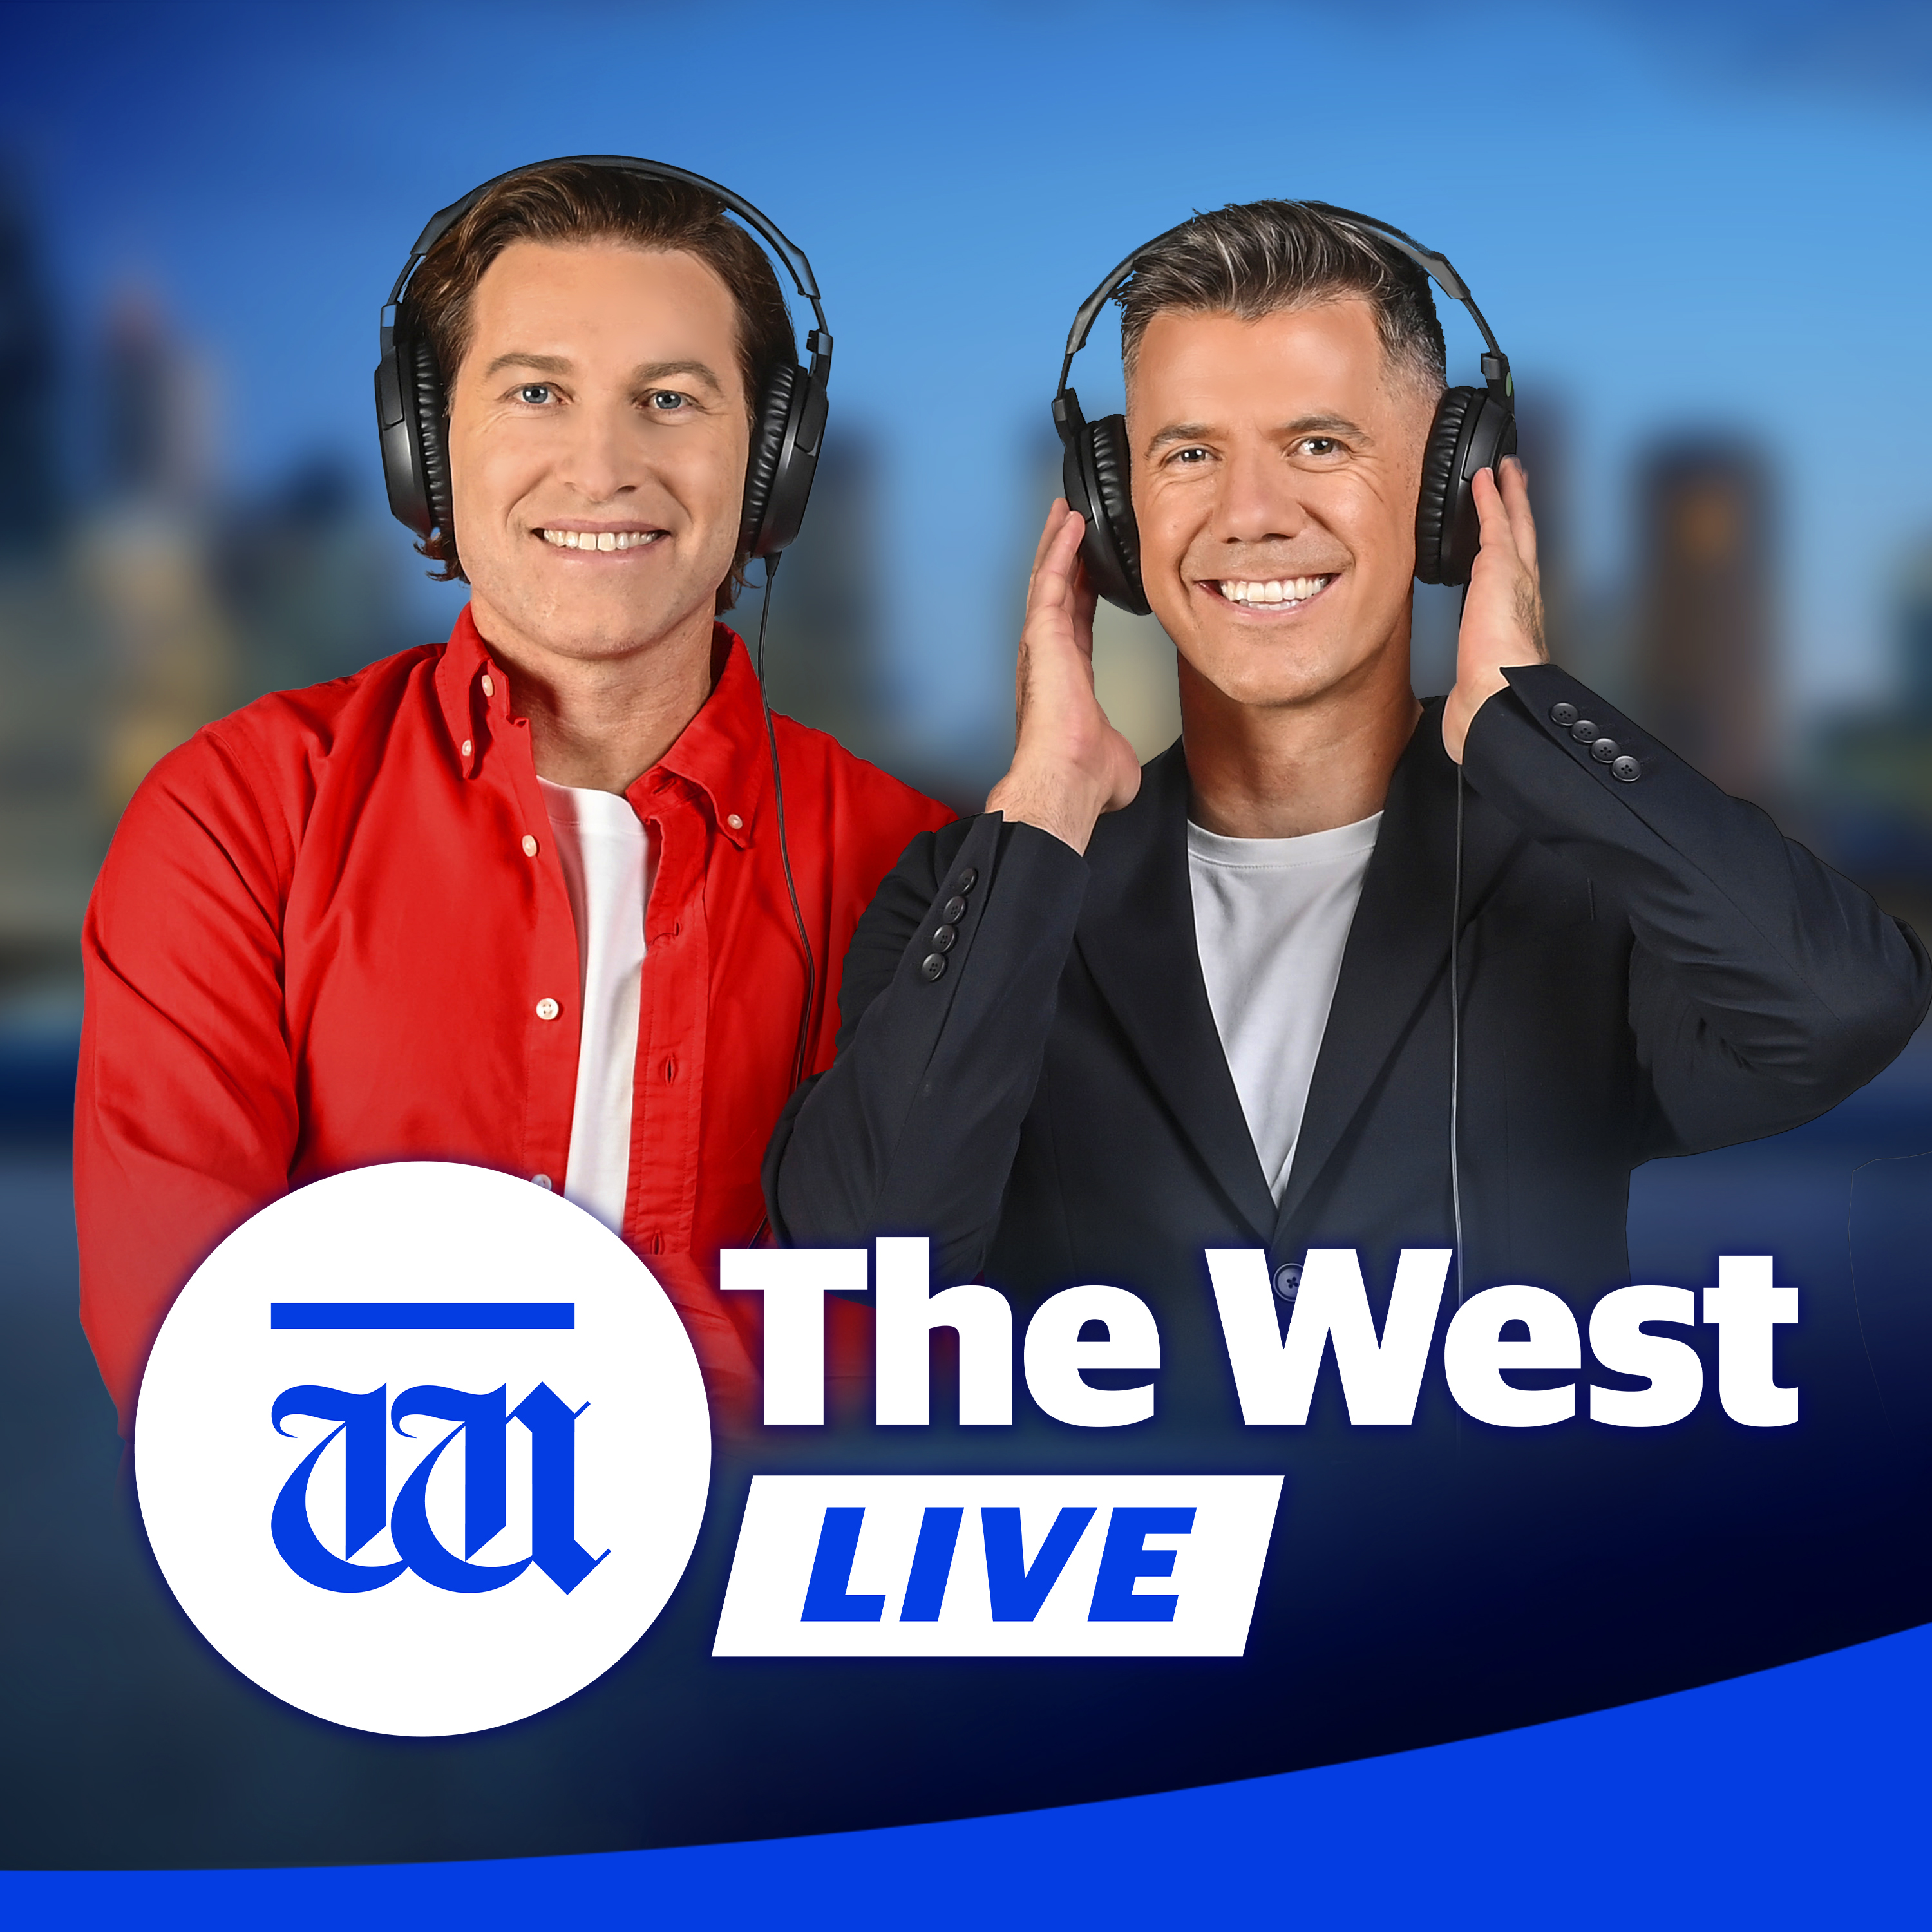 The West Live full show - Wednesday 22nd November, 2021